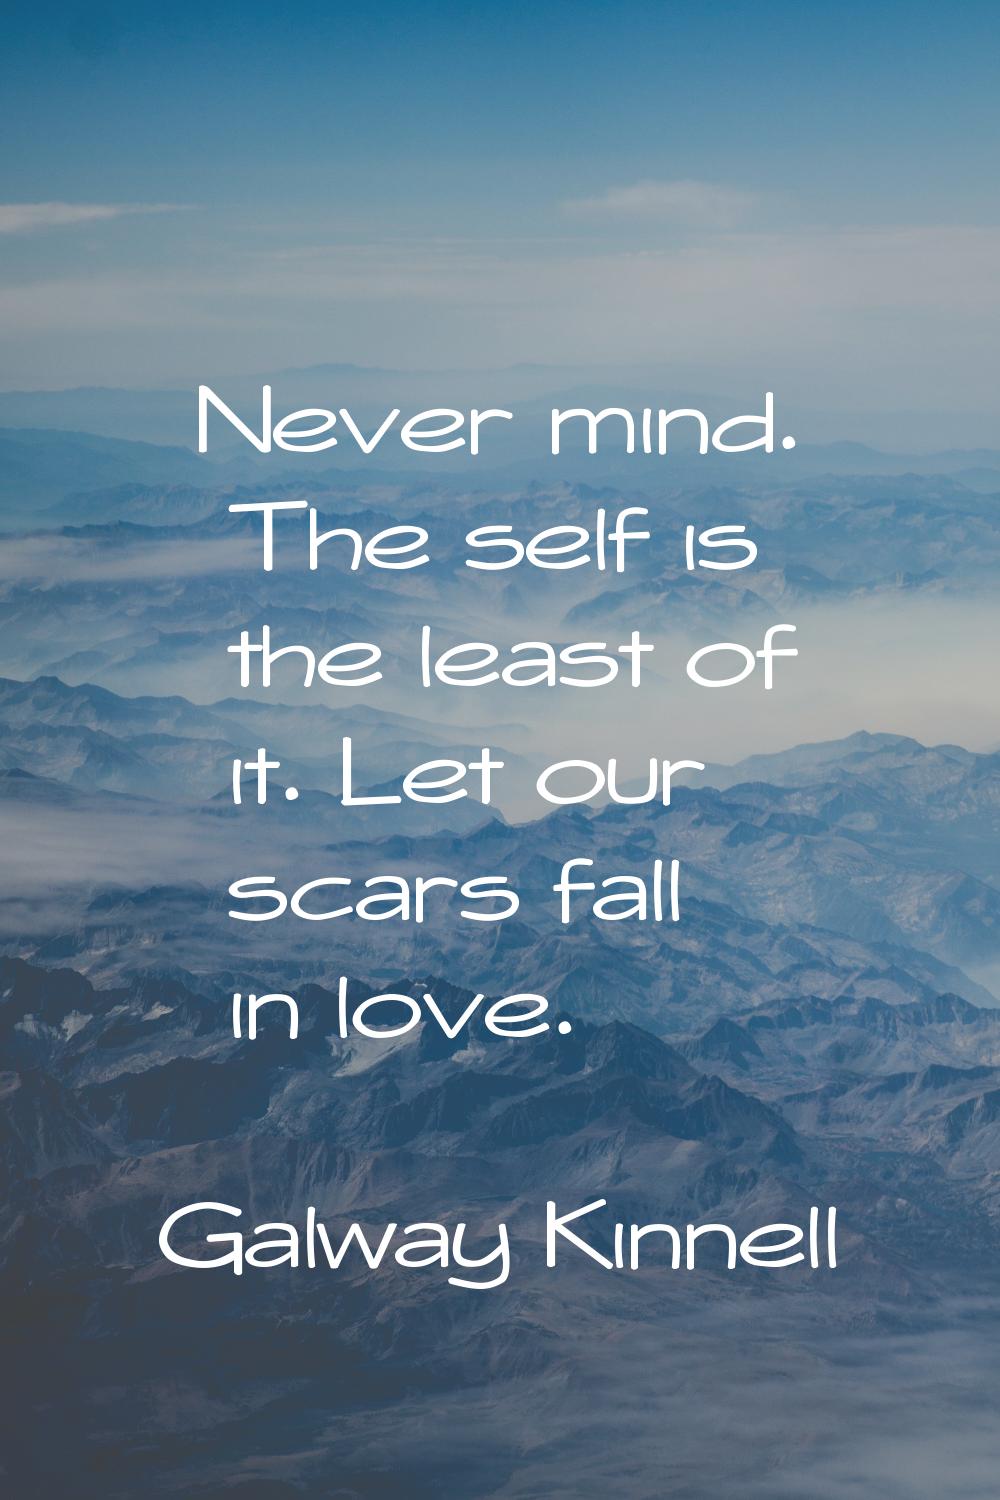 Never mind. The self is the least of it. Let our scars fall in love.